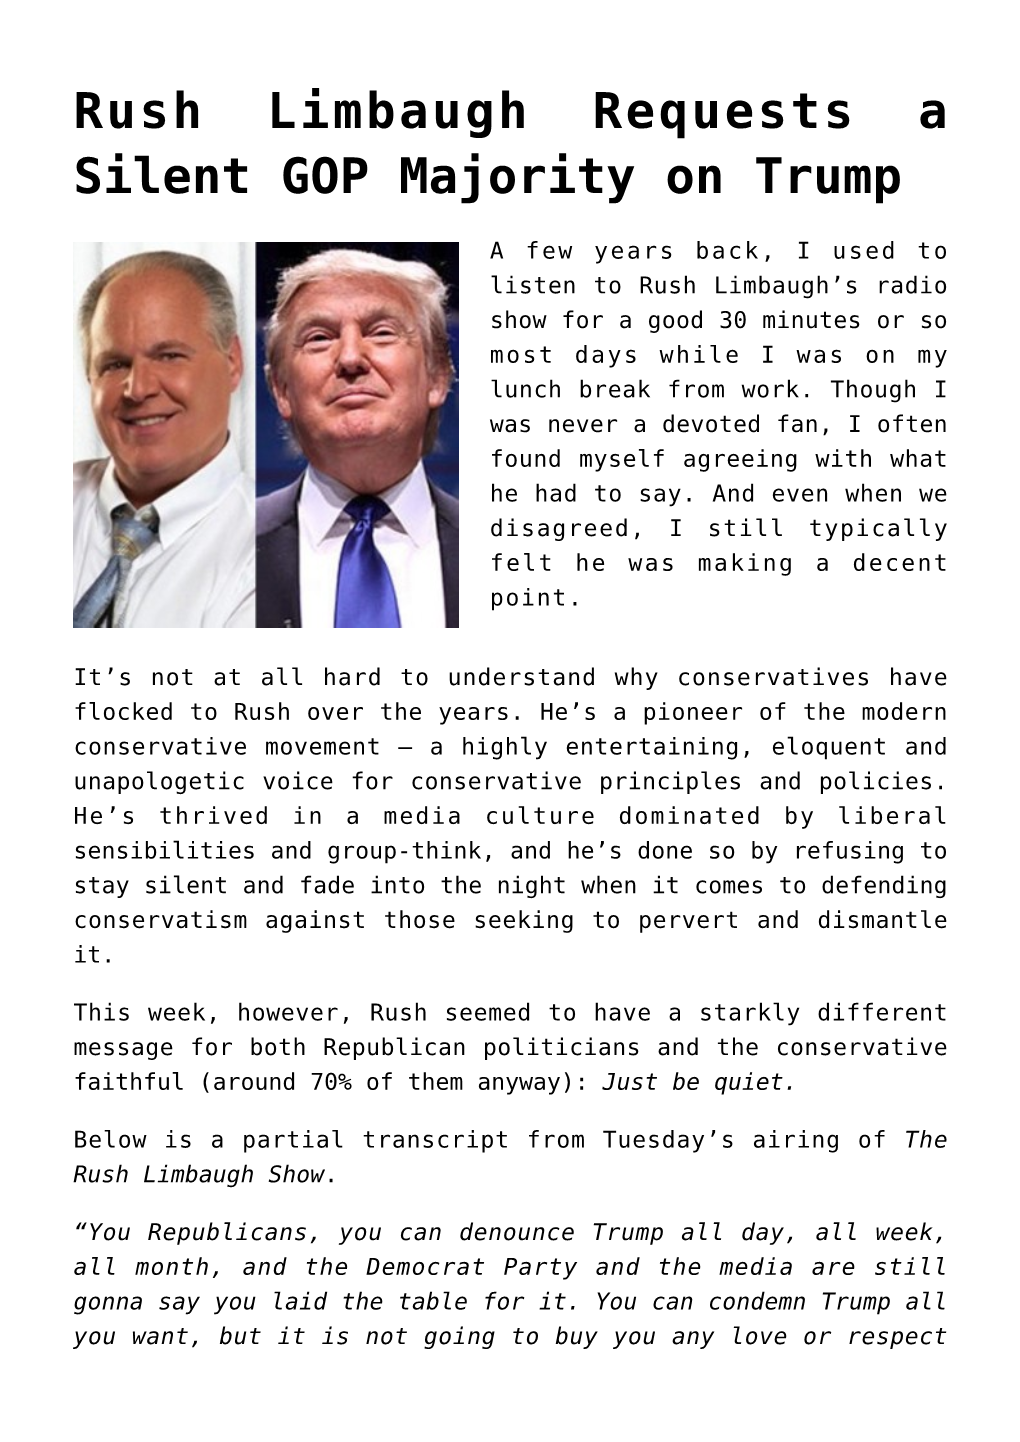 Rush Limbaugh Requests a Silent GOP Majority on Trump